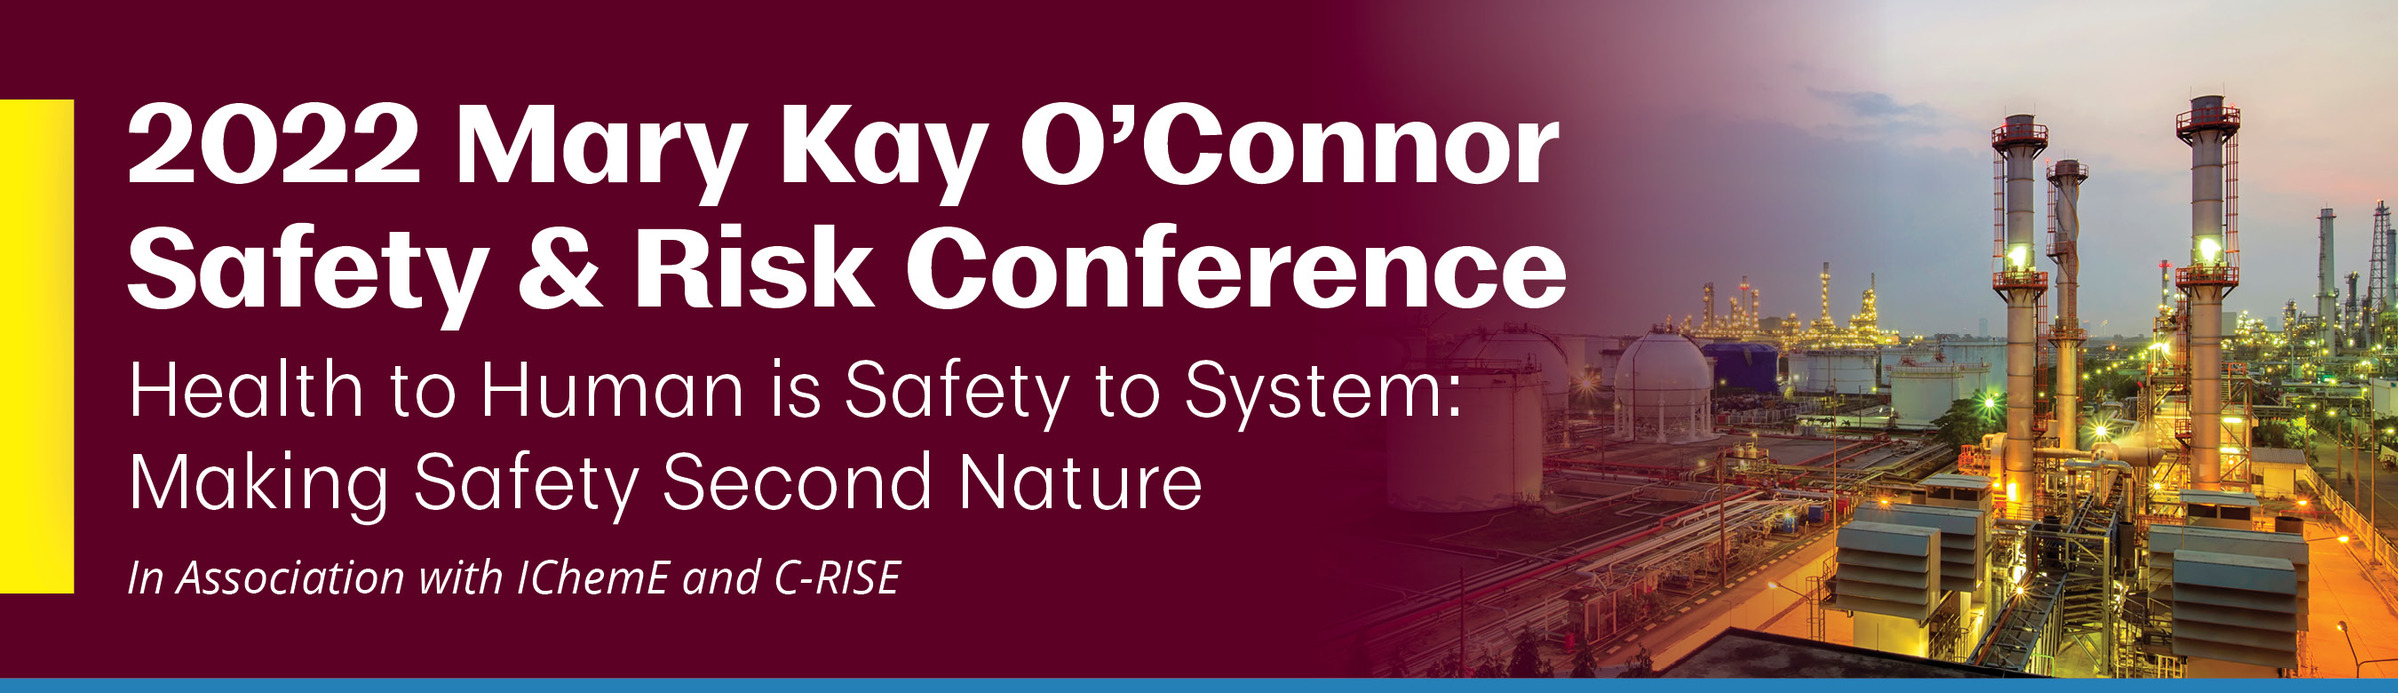 2022 Mary Kay O'Connor Safety & Risk Conference